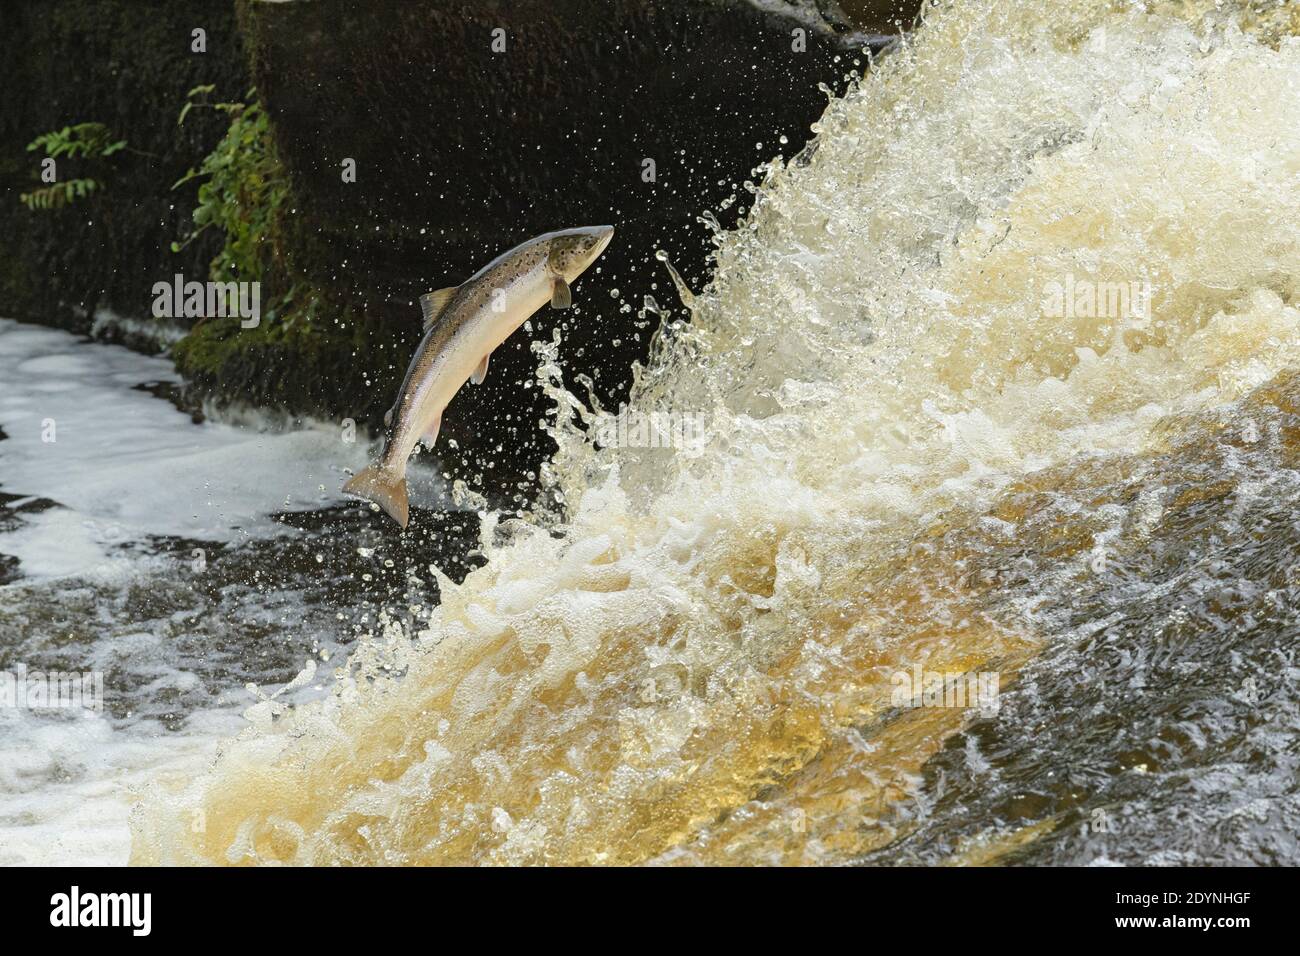 Atlantic salmon (Salmo salar) leaping a waterfall to get to spawning grounds upstream. River Endrick, Trossachs National Park, Scotland Stock Photo